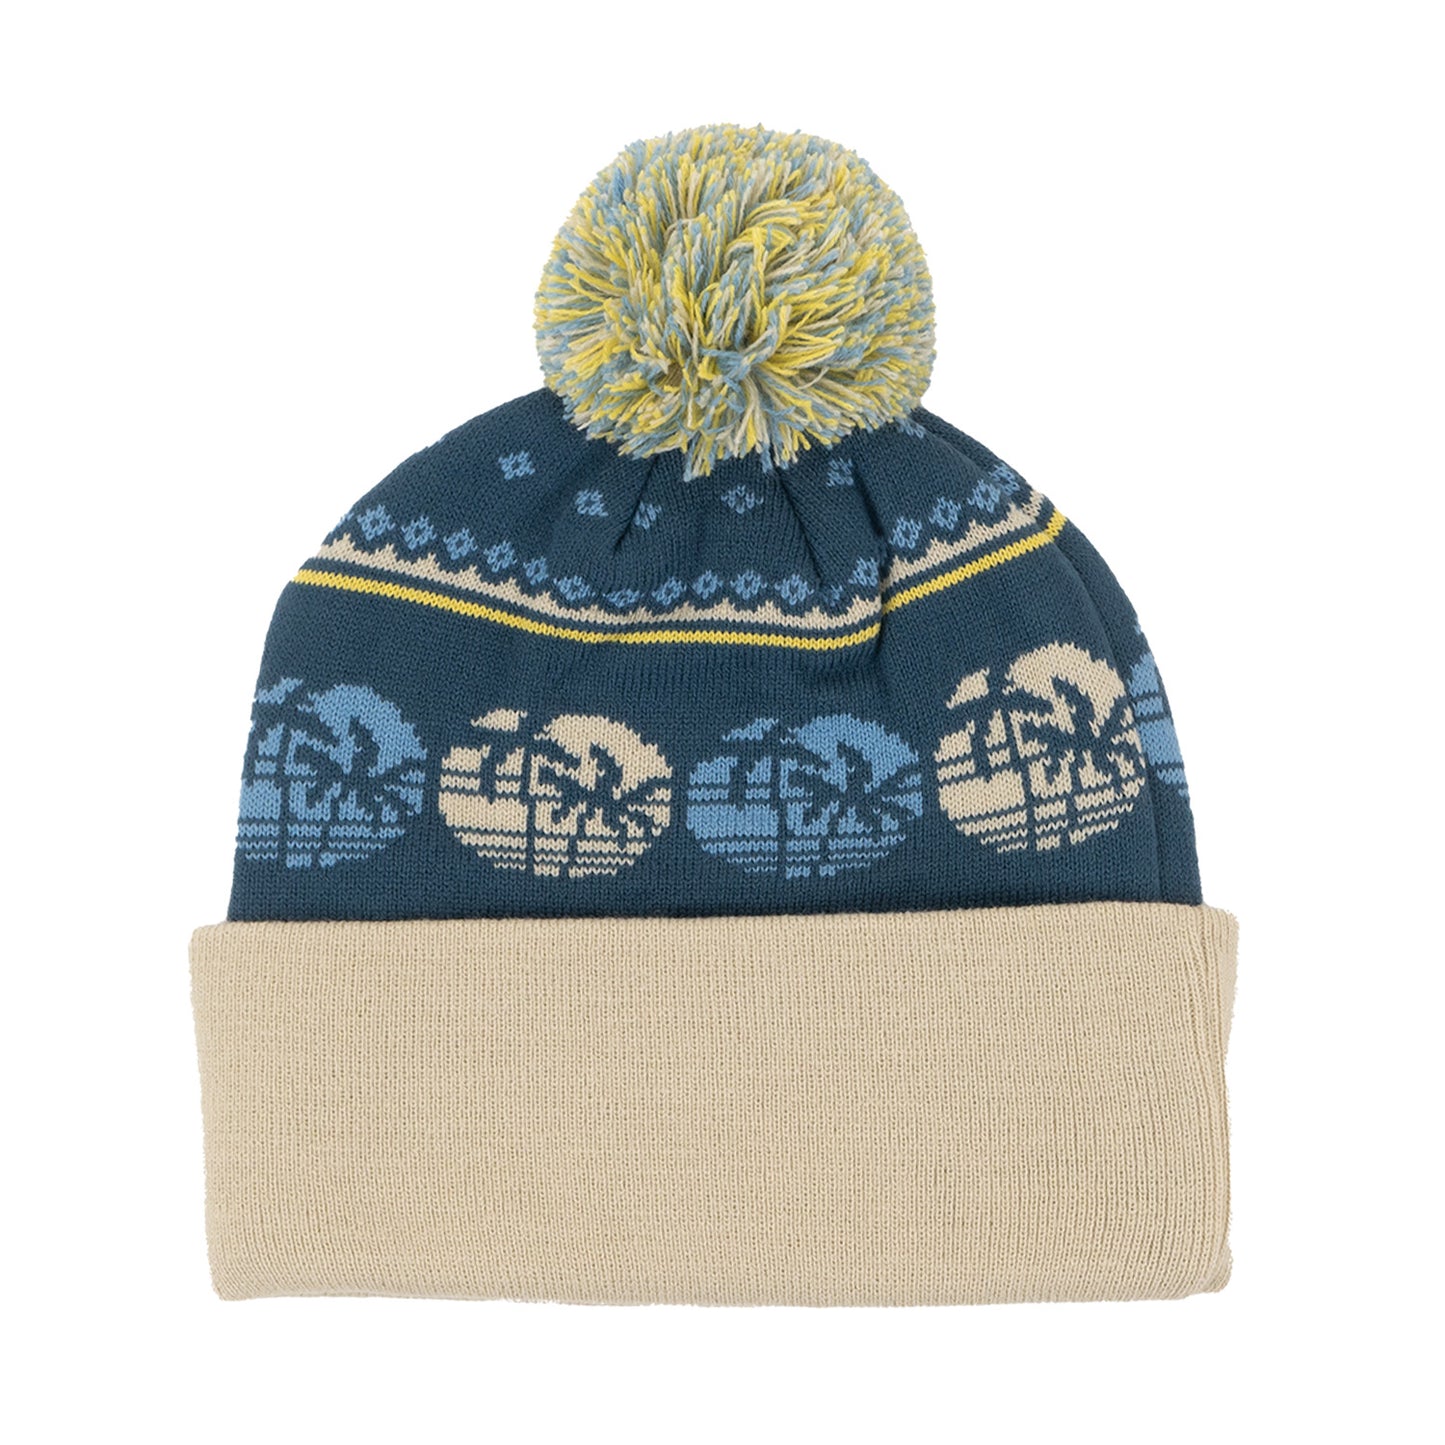 Golden Road Limited Edition Winter Beanie